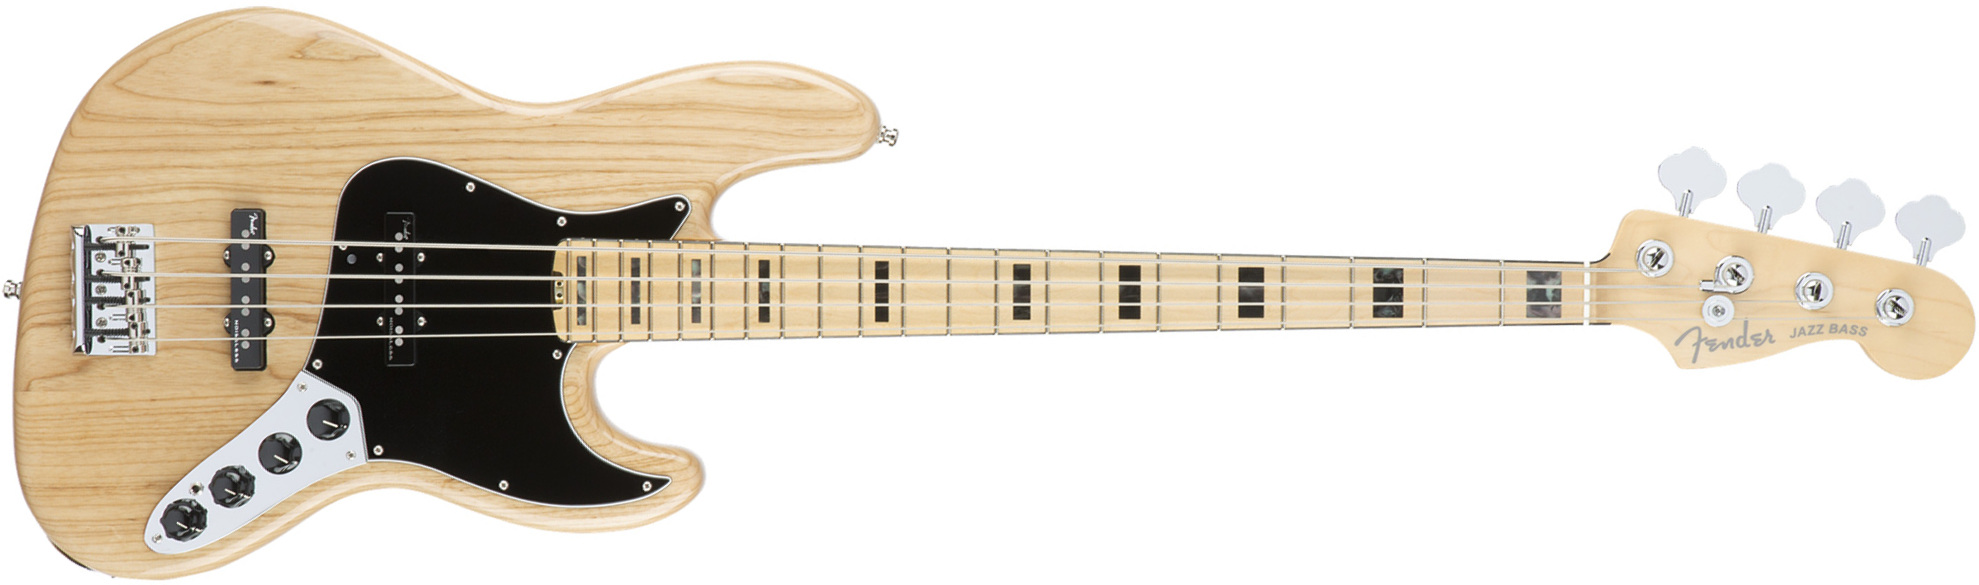 Fender Jazz Bass American Elite Ash 2016 (usa, Mn) - Natural - Solidbody E-bass - Main picture